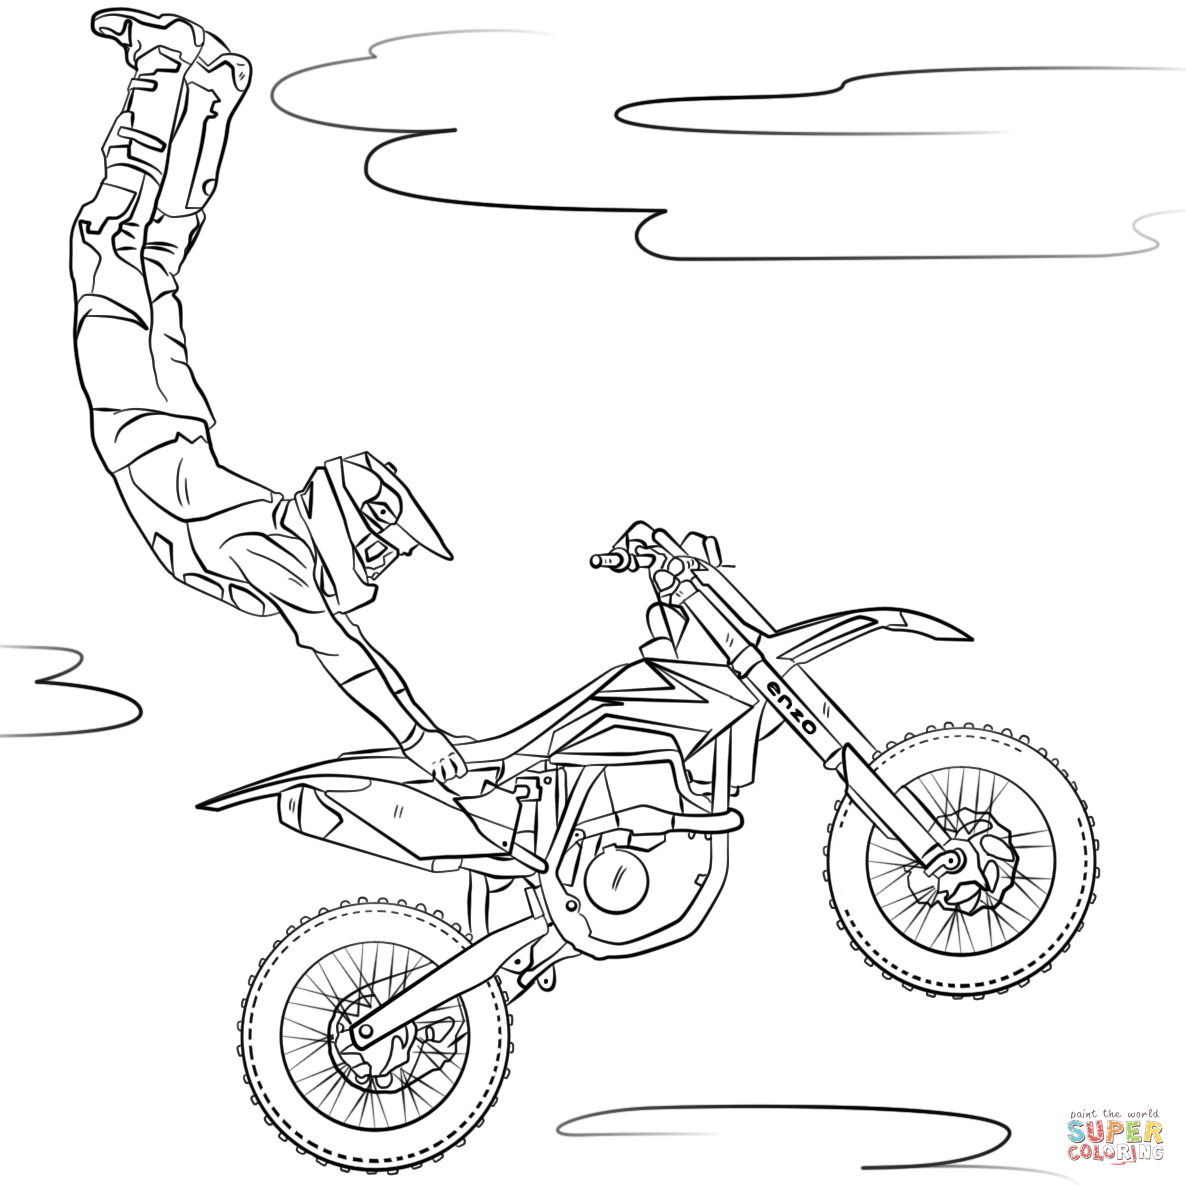 Freestyle Motocross coloring page | Free Printable Coloring ...